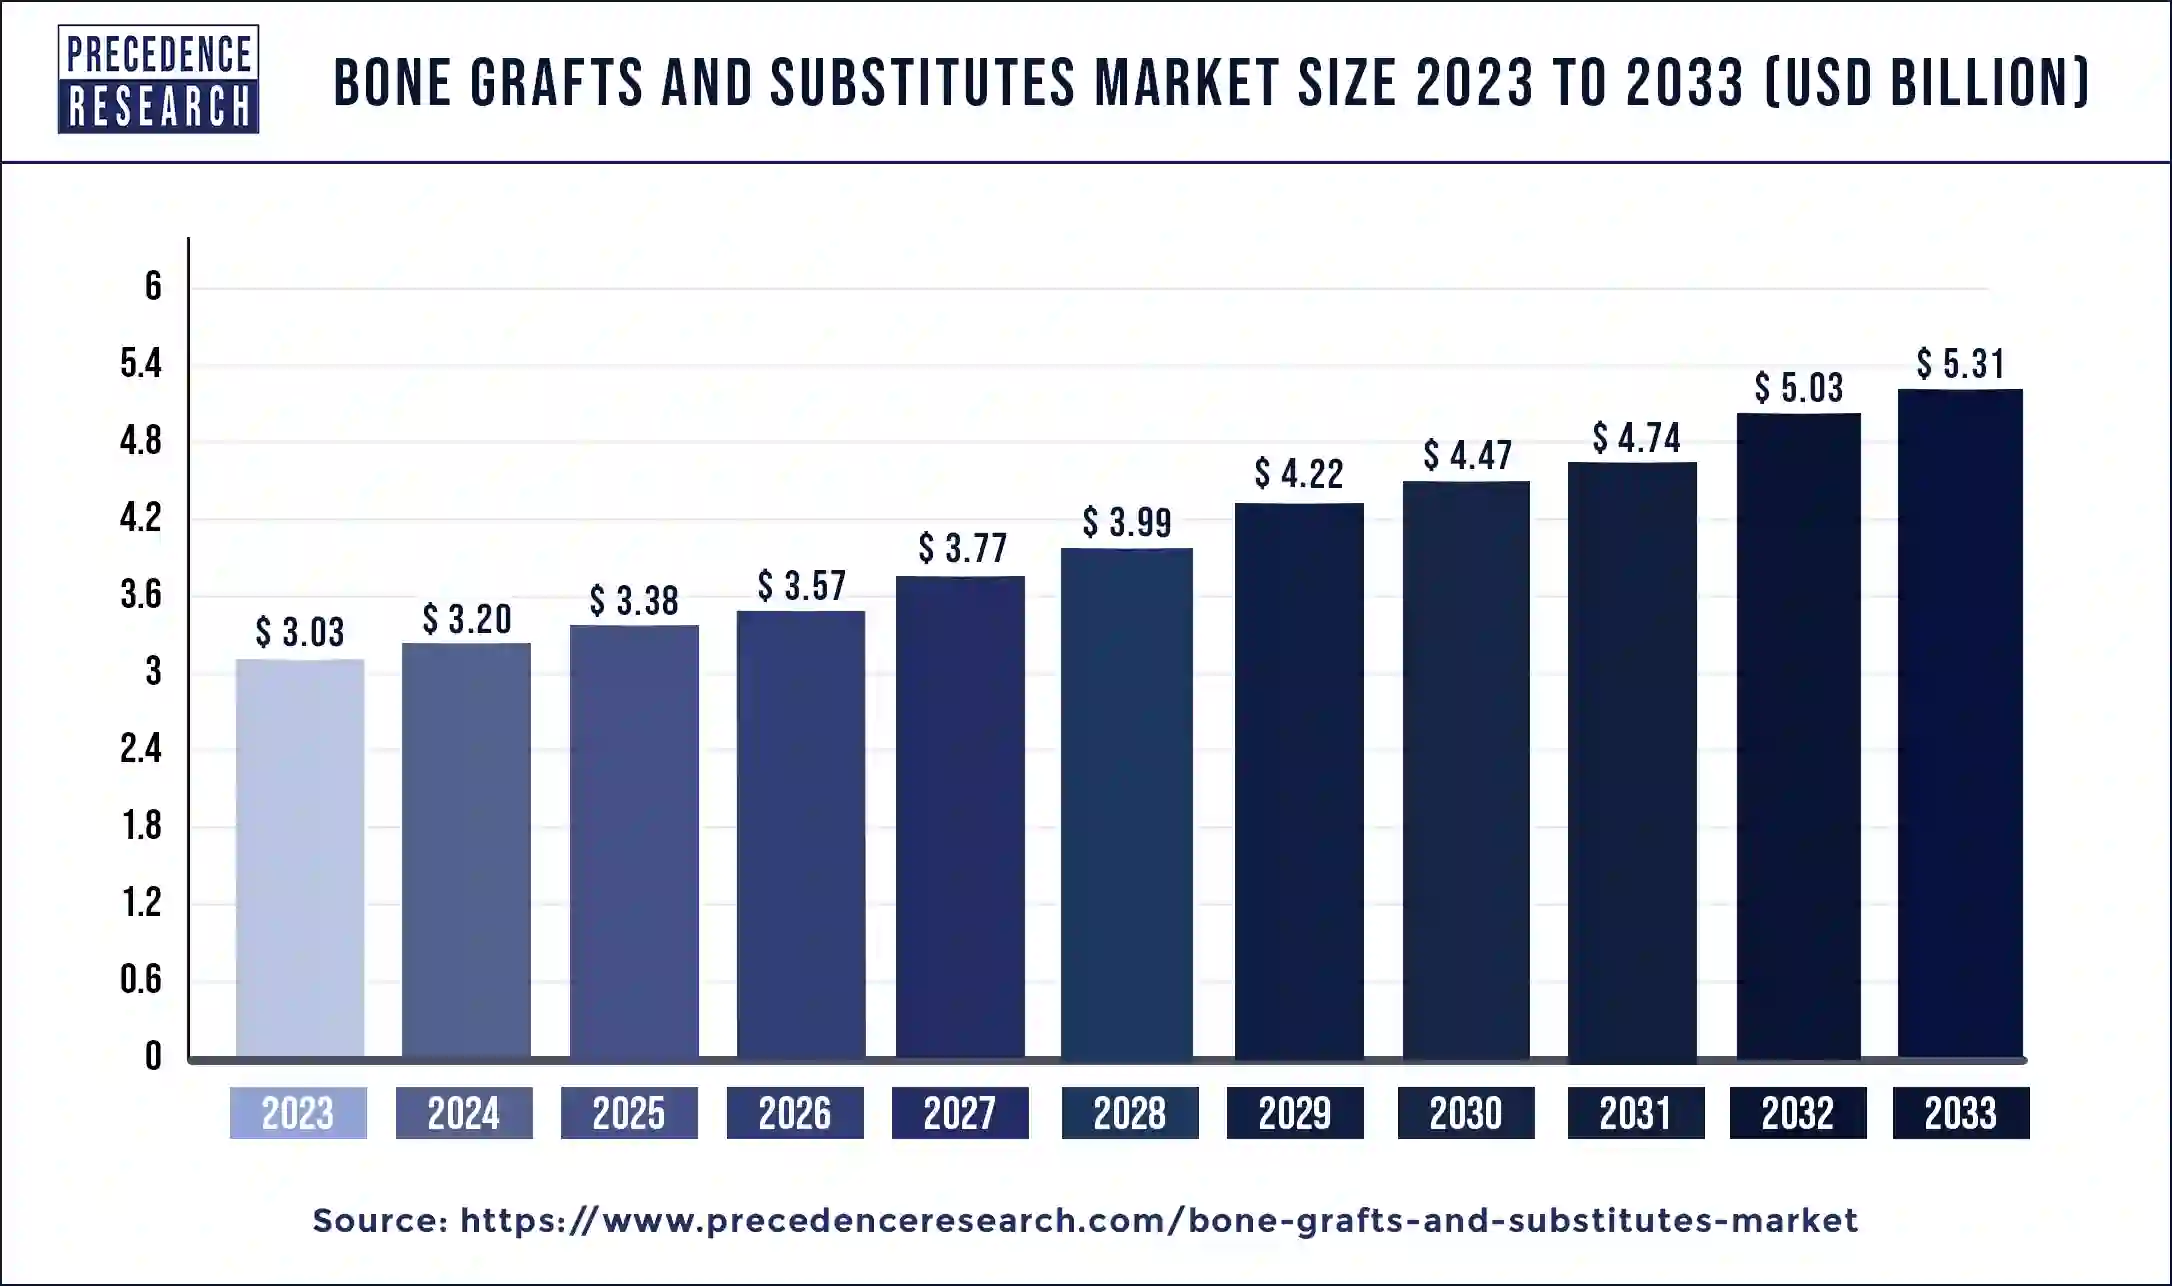 Bone Grafts and Substitutes Market Size 2024 To 2033